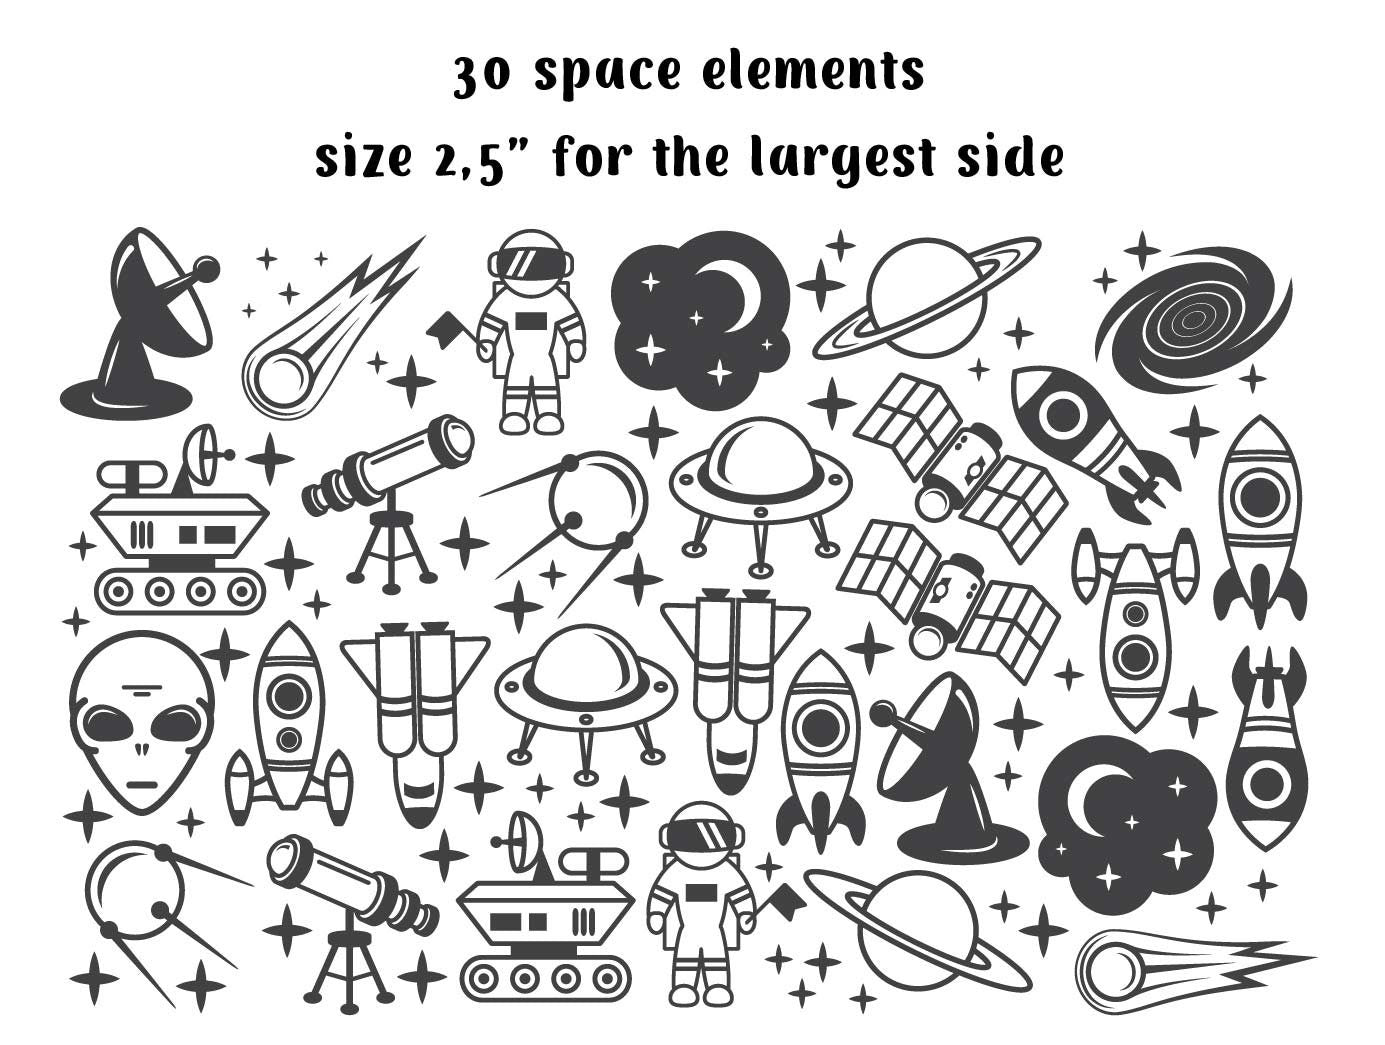 Outer Space Wall Decals Astronaut Stickers Planet Decor Moon Stars Cosmos Boys Girls Play Room nursery kids, LF483